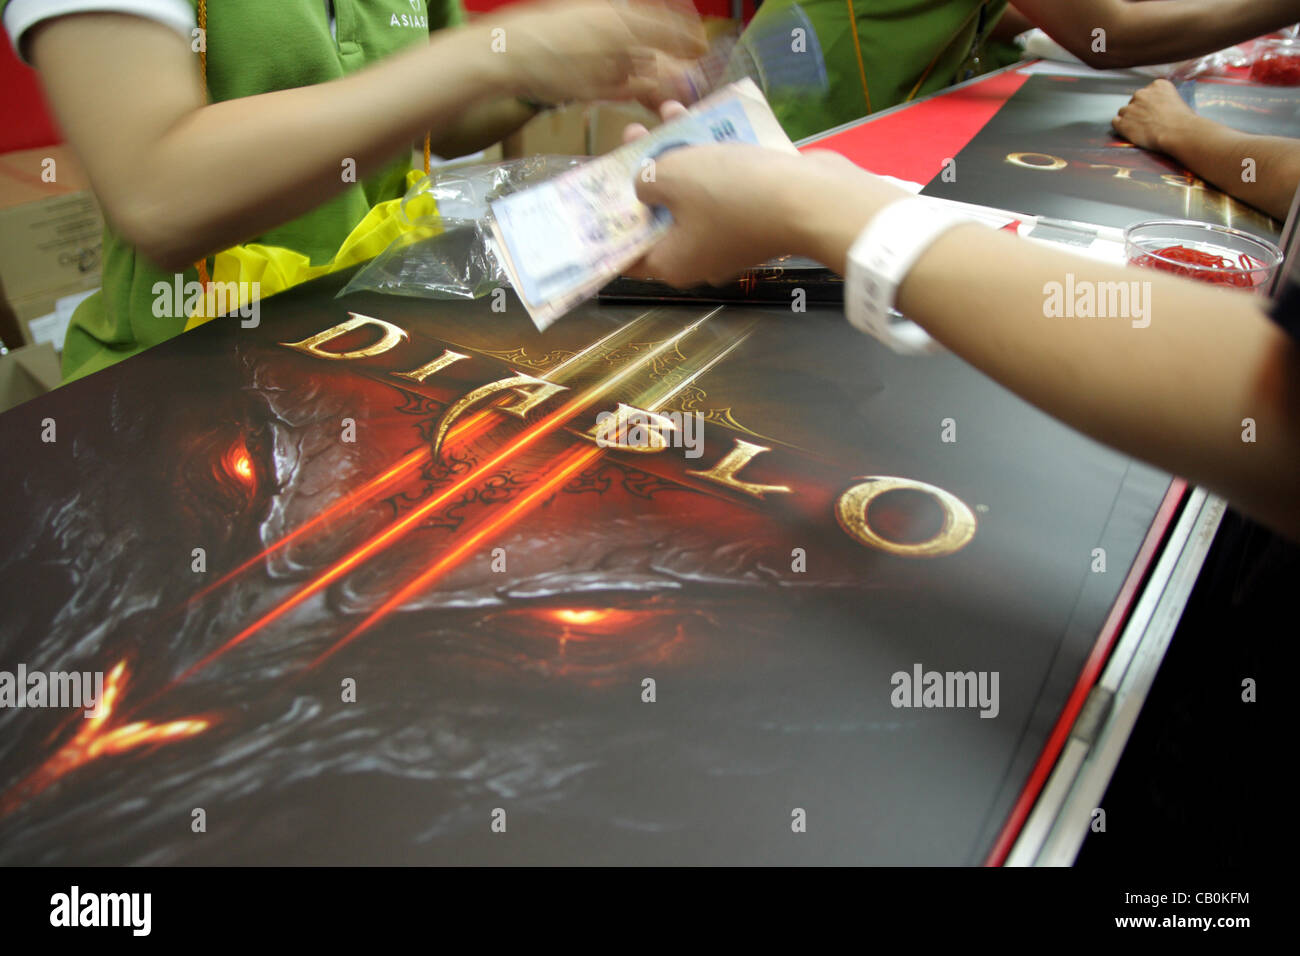 May 15, 2012, Siam Paragon , Bangkok , Thailand . Thousand of gamers buying ' Diablo 3' , an action role-playing game by Blizzard Entertainment after waiting for 12 year . Stock Photo